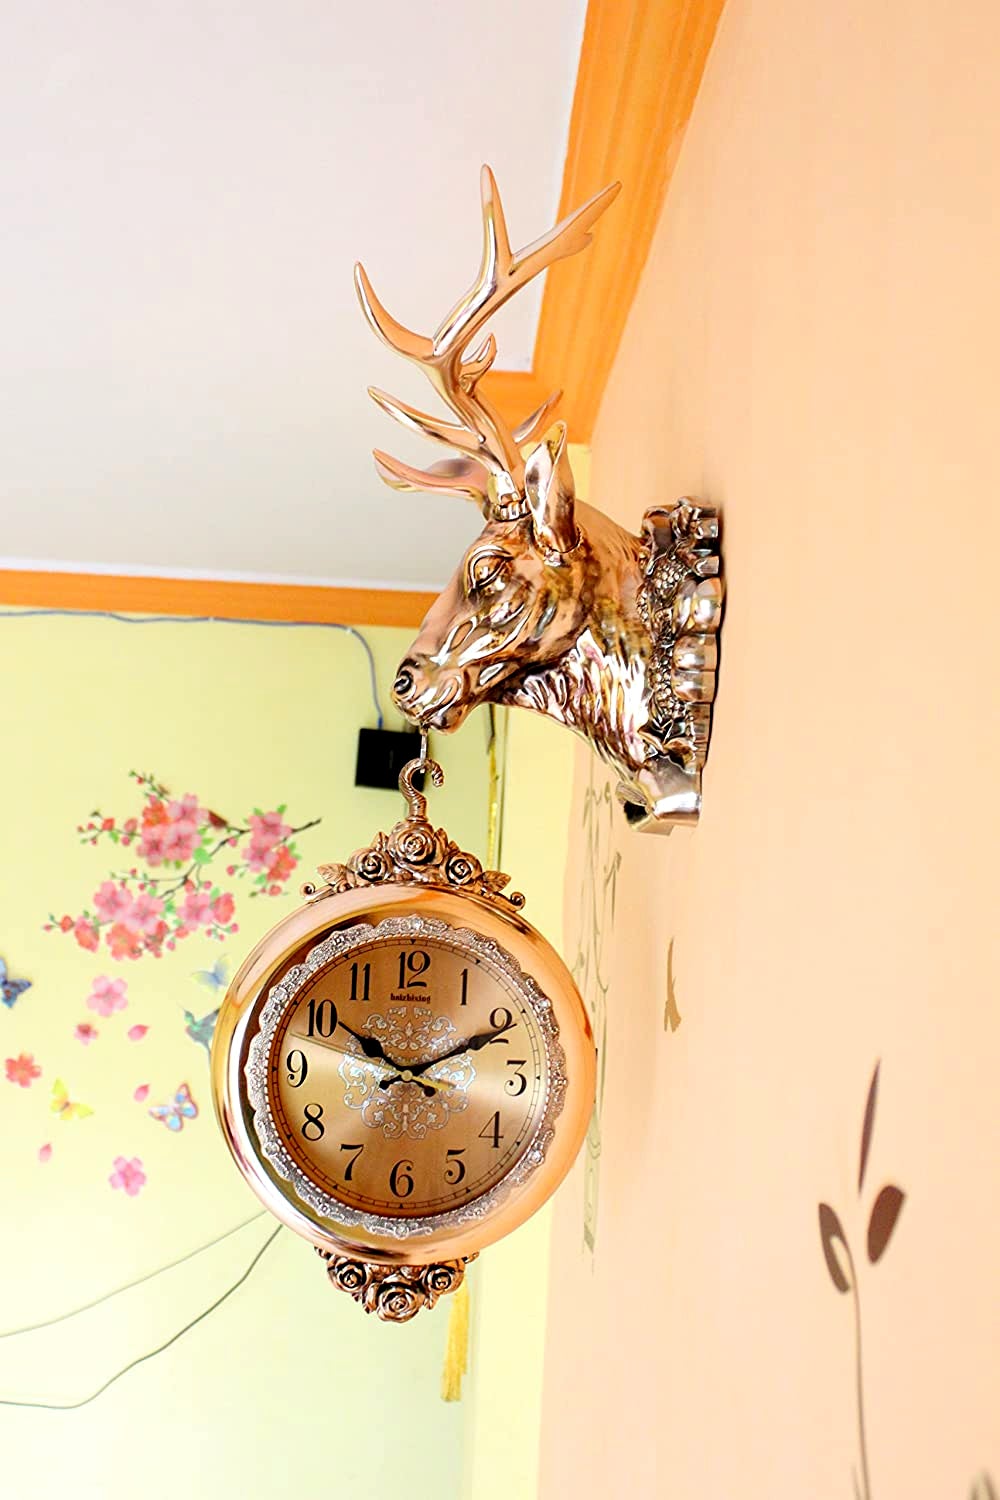 FunkyTradition Royal Metallic Color Dual Hanging Reindeer Wall Clock| Wall Watch | Wall Clock for Home Office Decor and Gifts 75 cm Tall